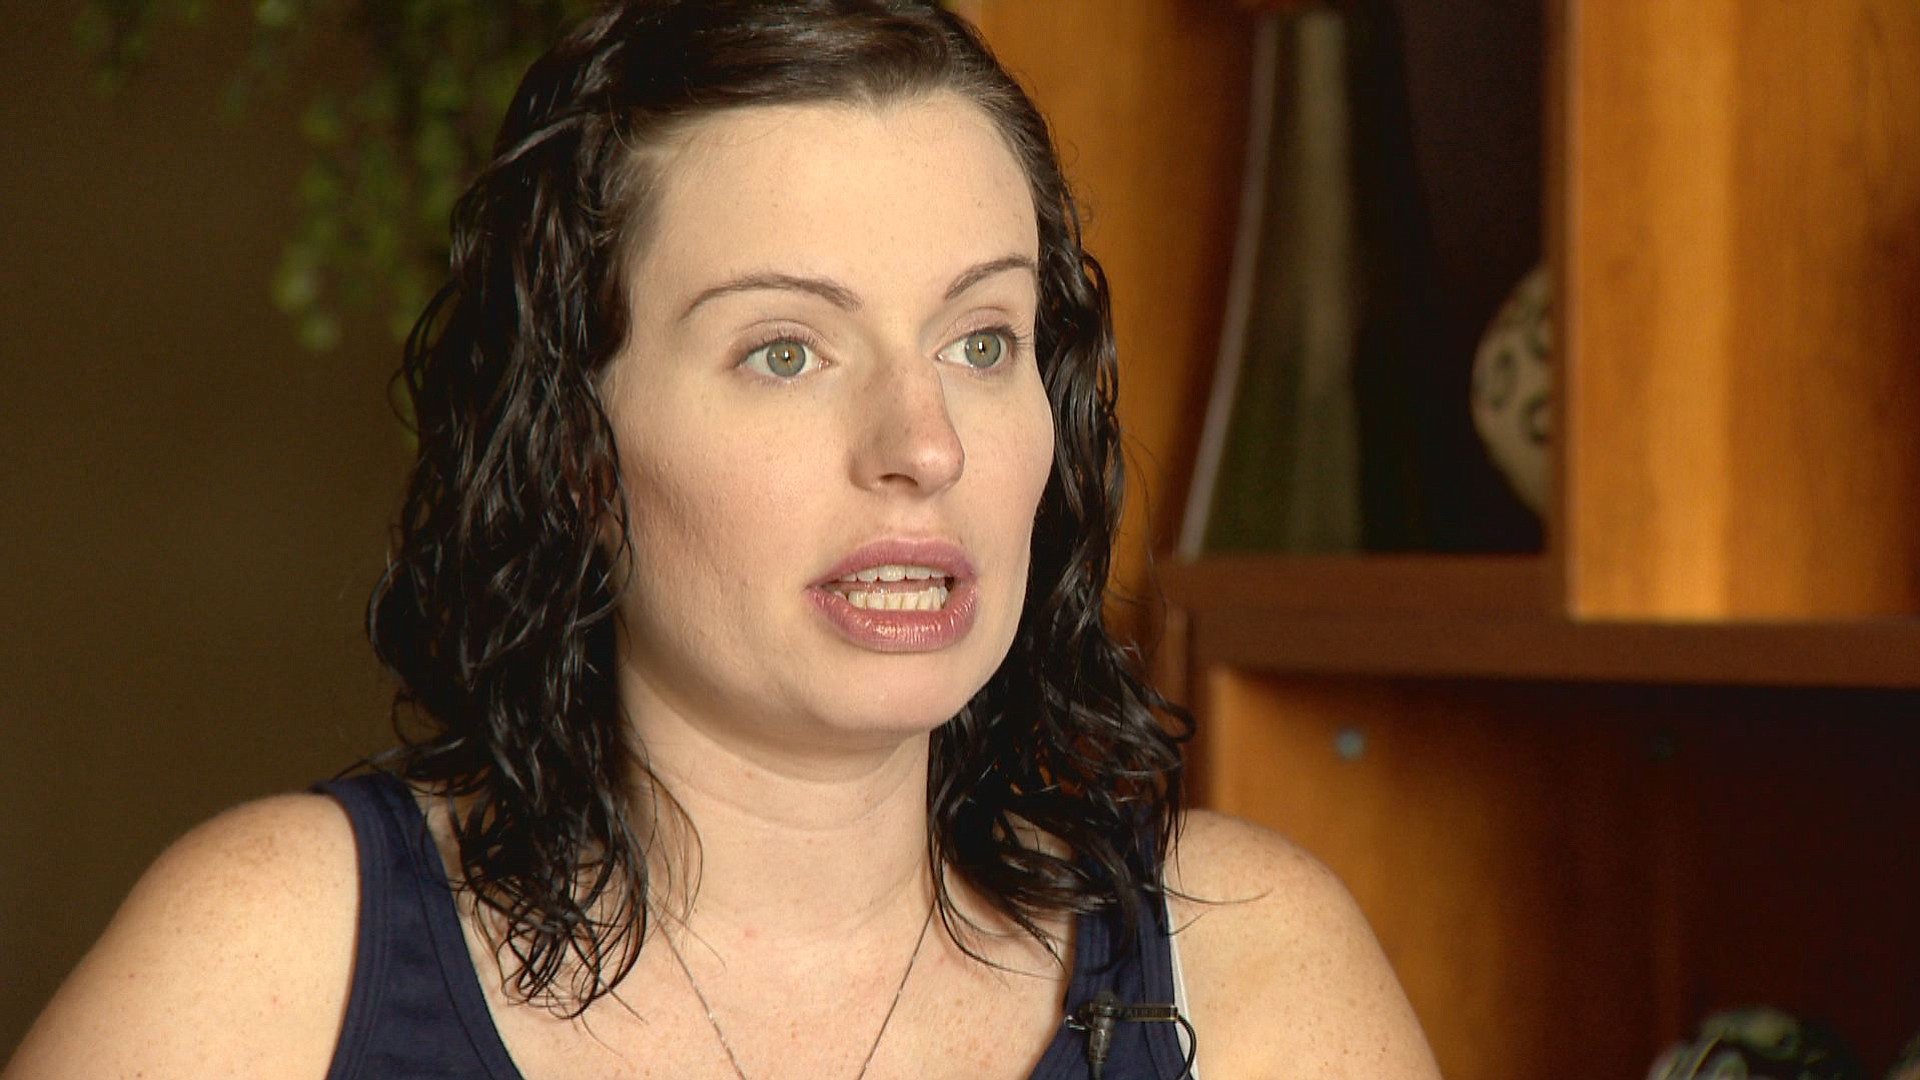 Expectant mother Amber McCullough is pictured during an interview with Colorado's KUSA-TV, a day before she was to give birth to conjoined twins in Aurora, Colo.